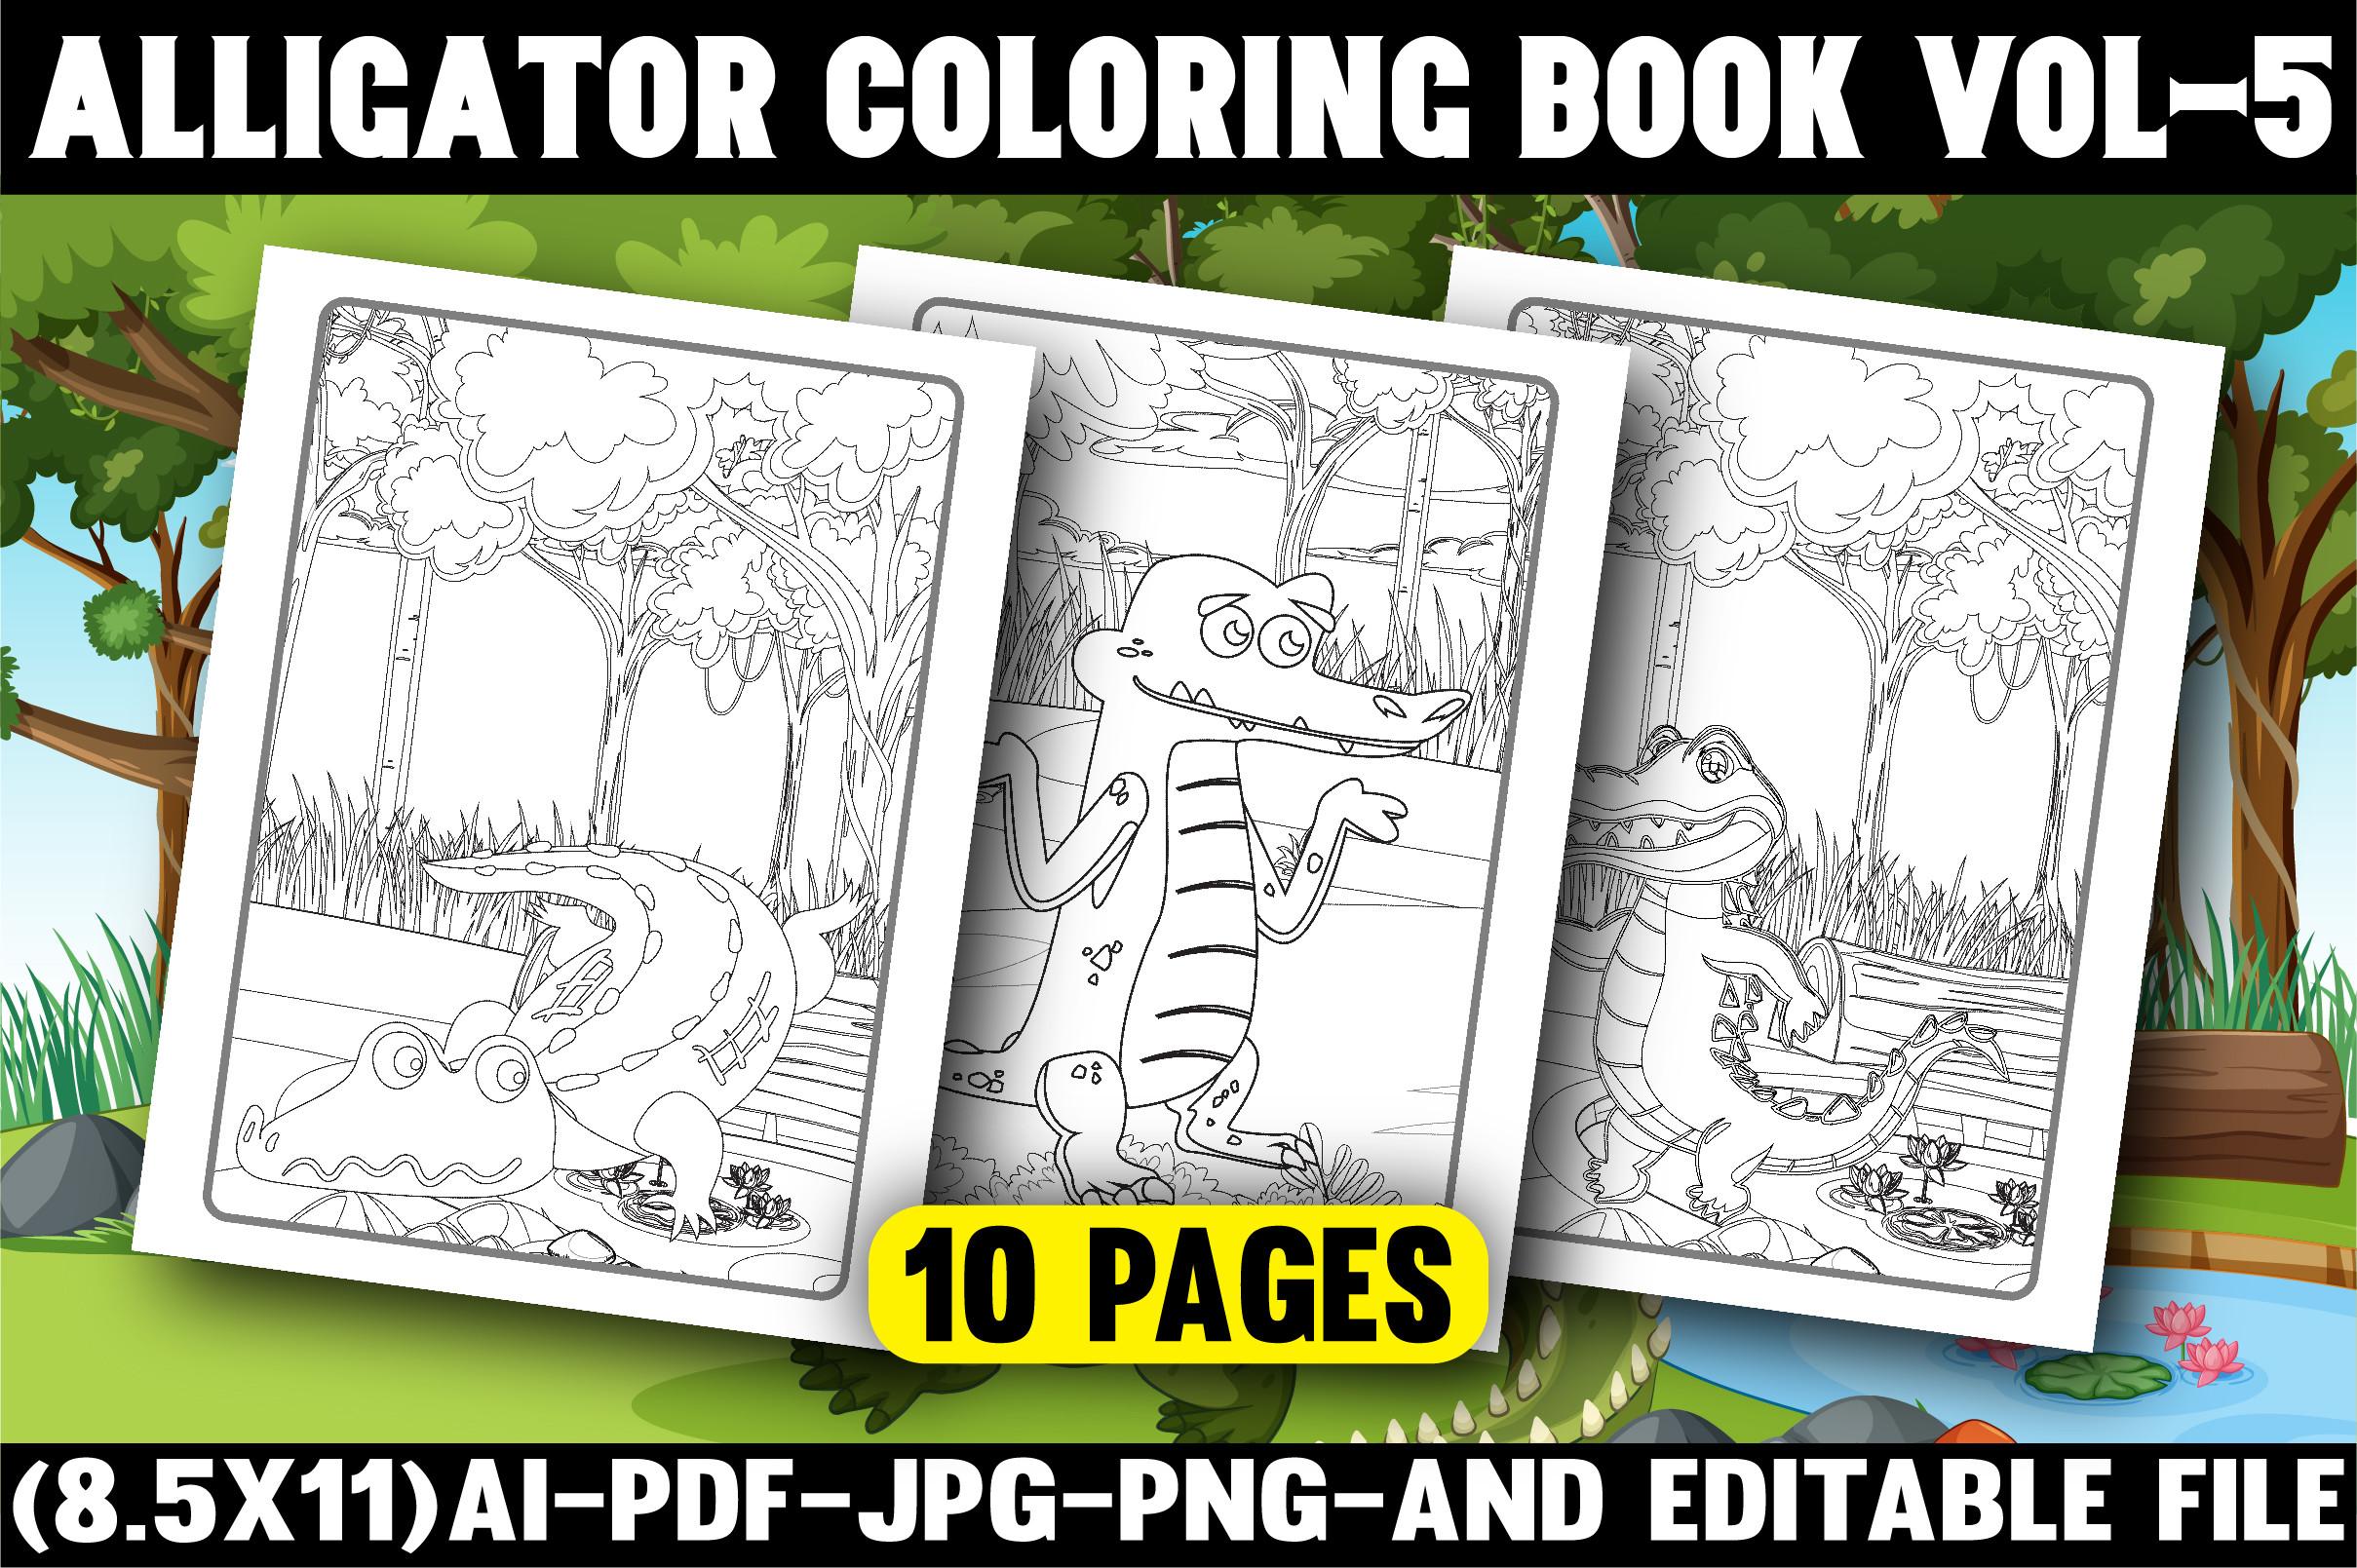 Alligator Coloring Pages for Kids VoL-5